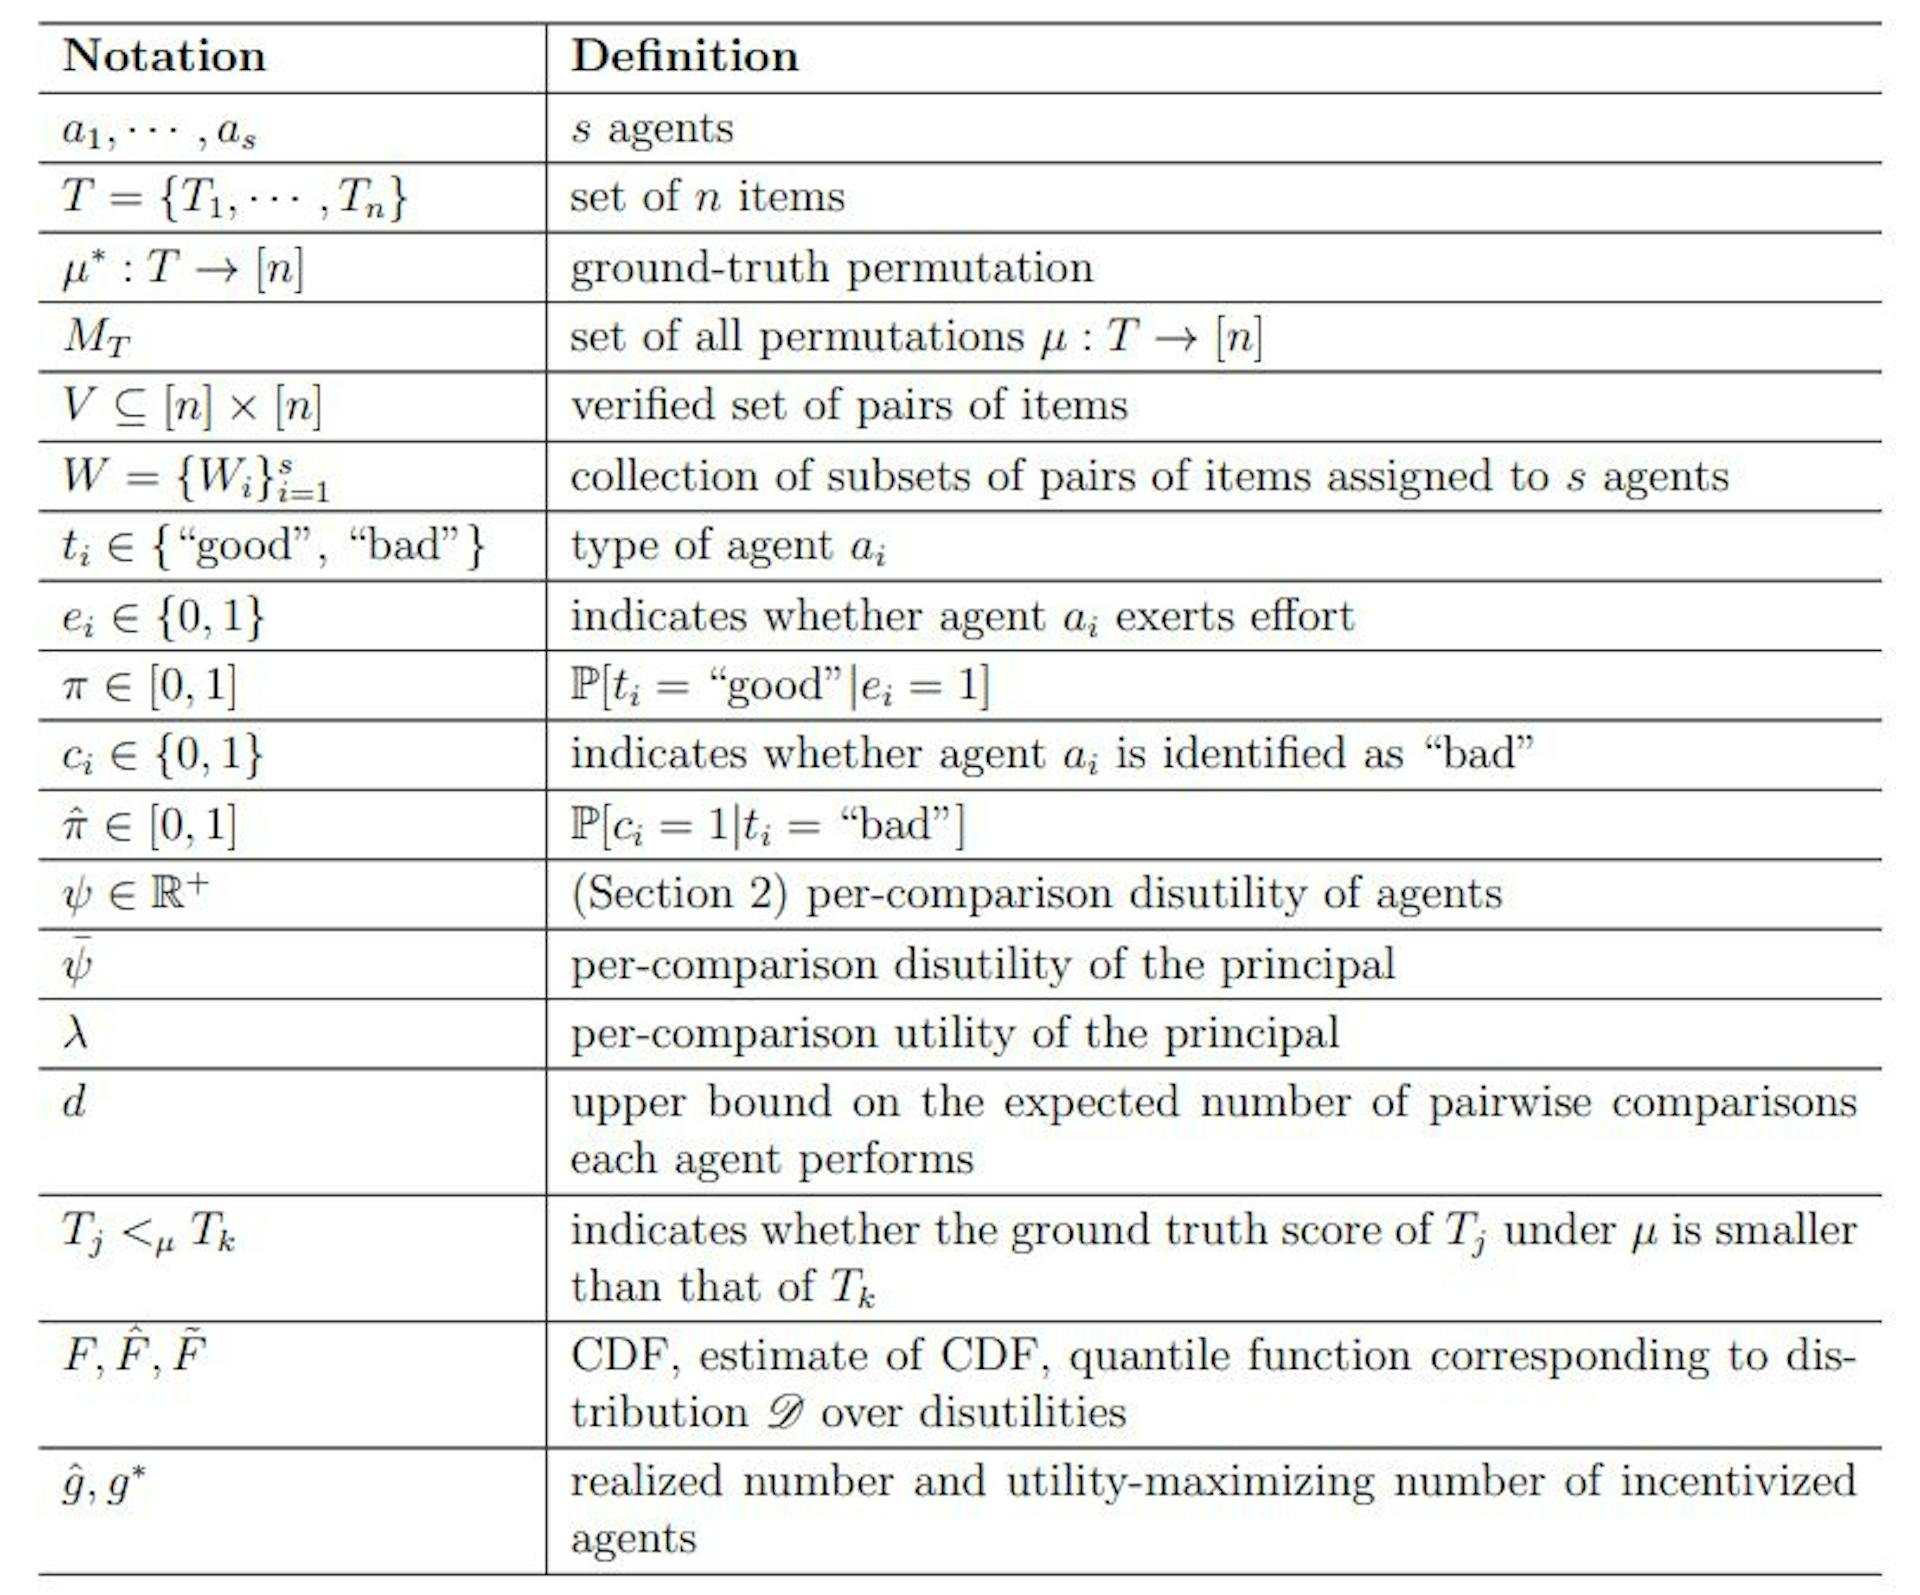 Table 1: Summary of Most Commonly Used Notation